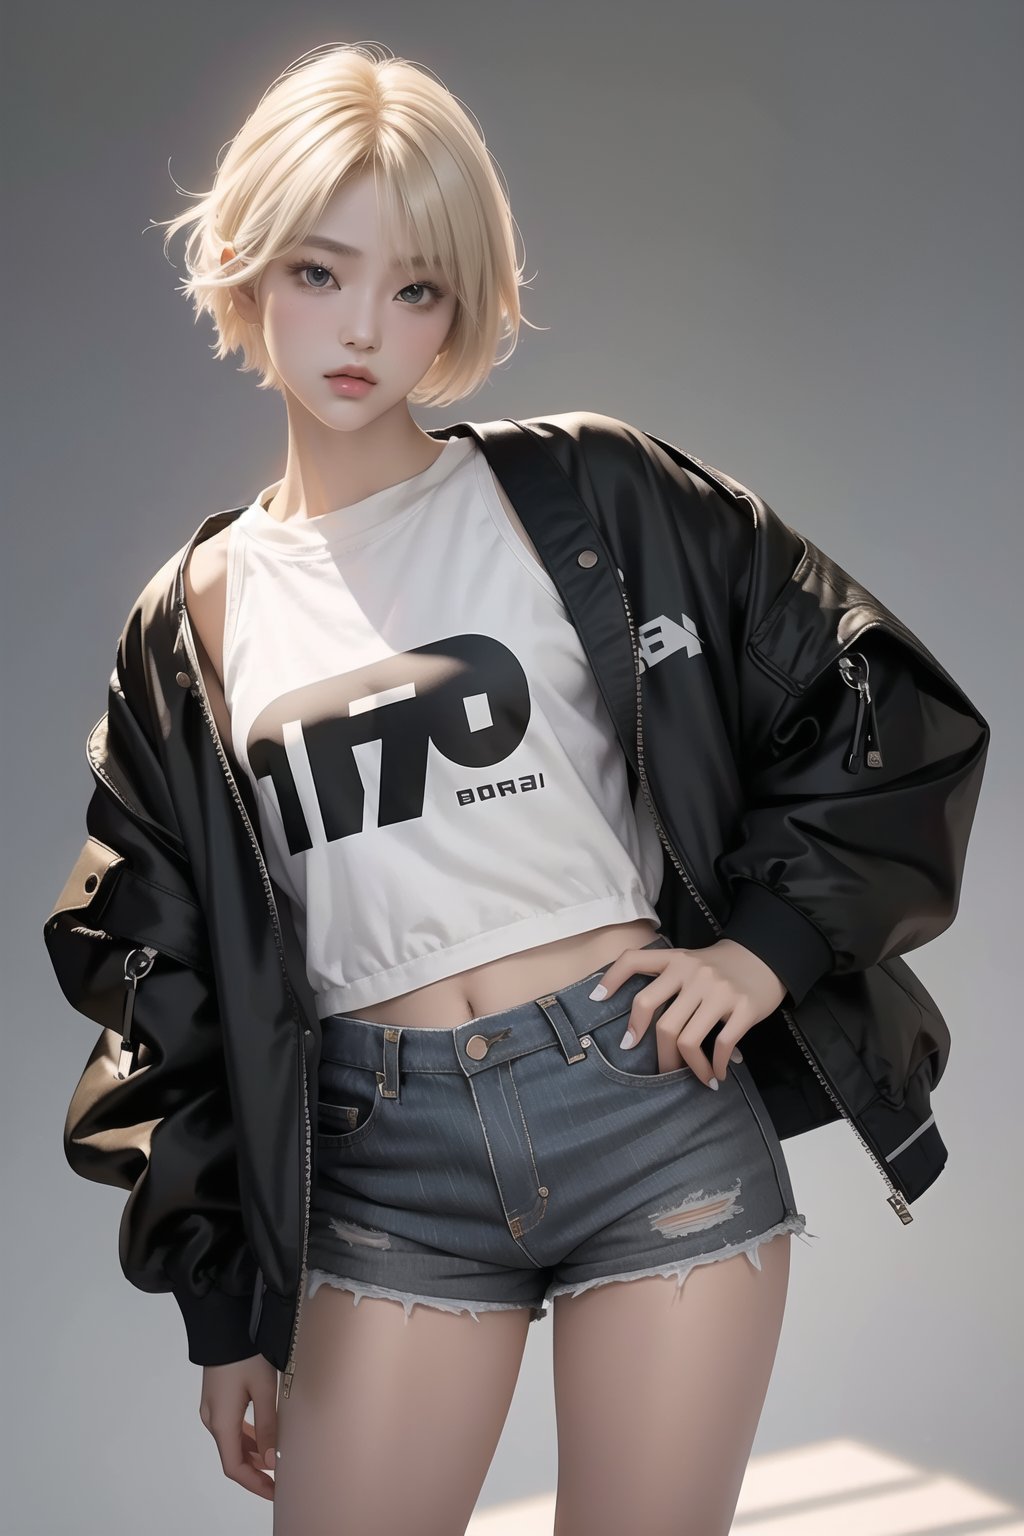 Best quality, masterpiece, ultra high res, (photorealistic:1.4), raw photo, korea girl 22 year old, blond sleek pixie shorts hair style, wearing oversize black jacket bomber m1, shorts bluejeans, white sneaker, solid grey background,鄰家女孩,女孩